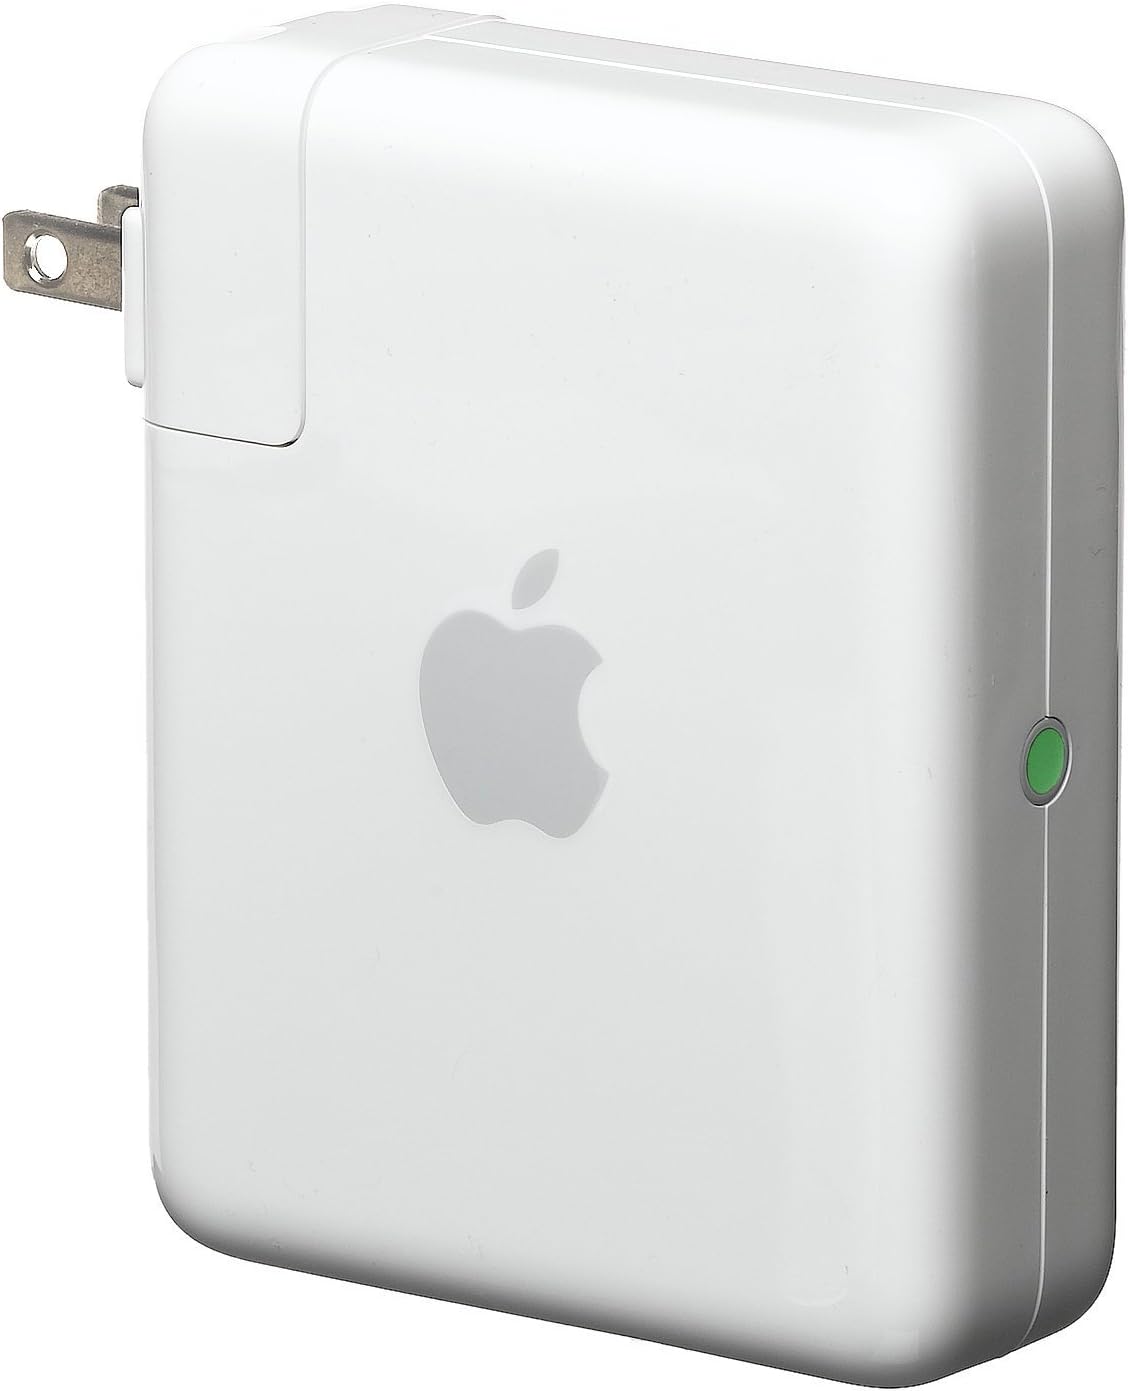 Apple Airport device reset page